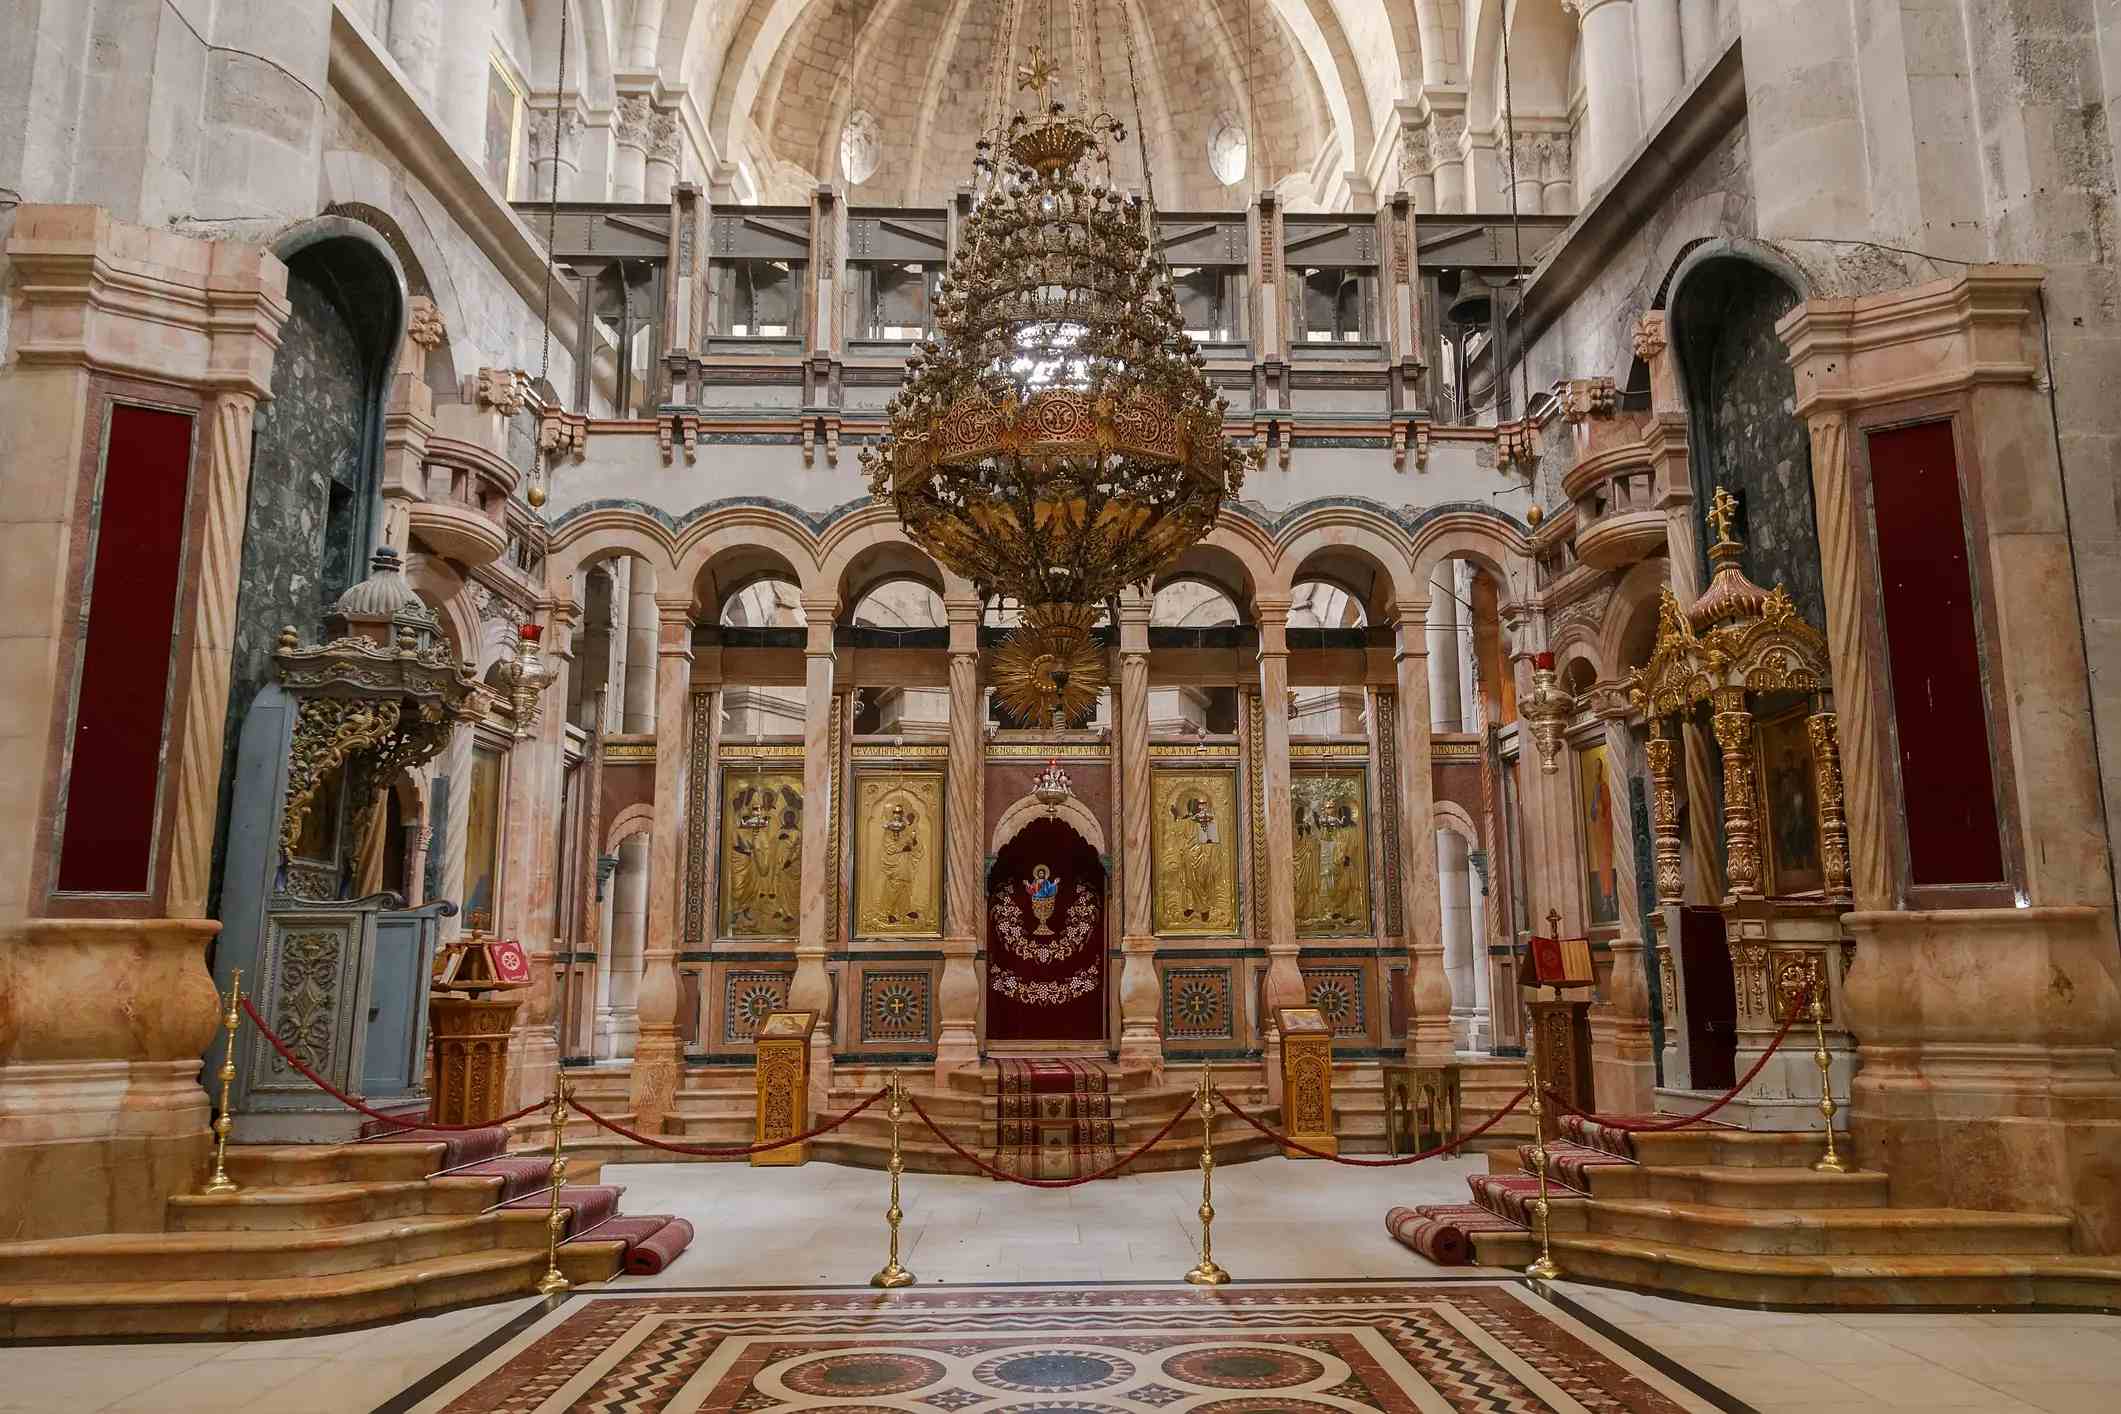 Church of the Holy Sepulchre image